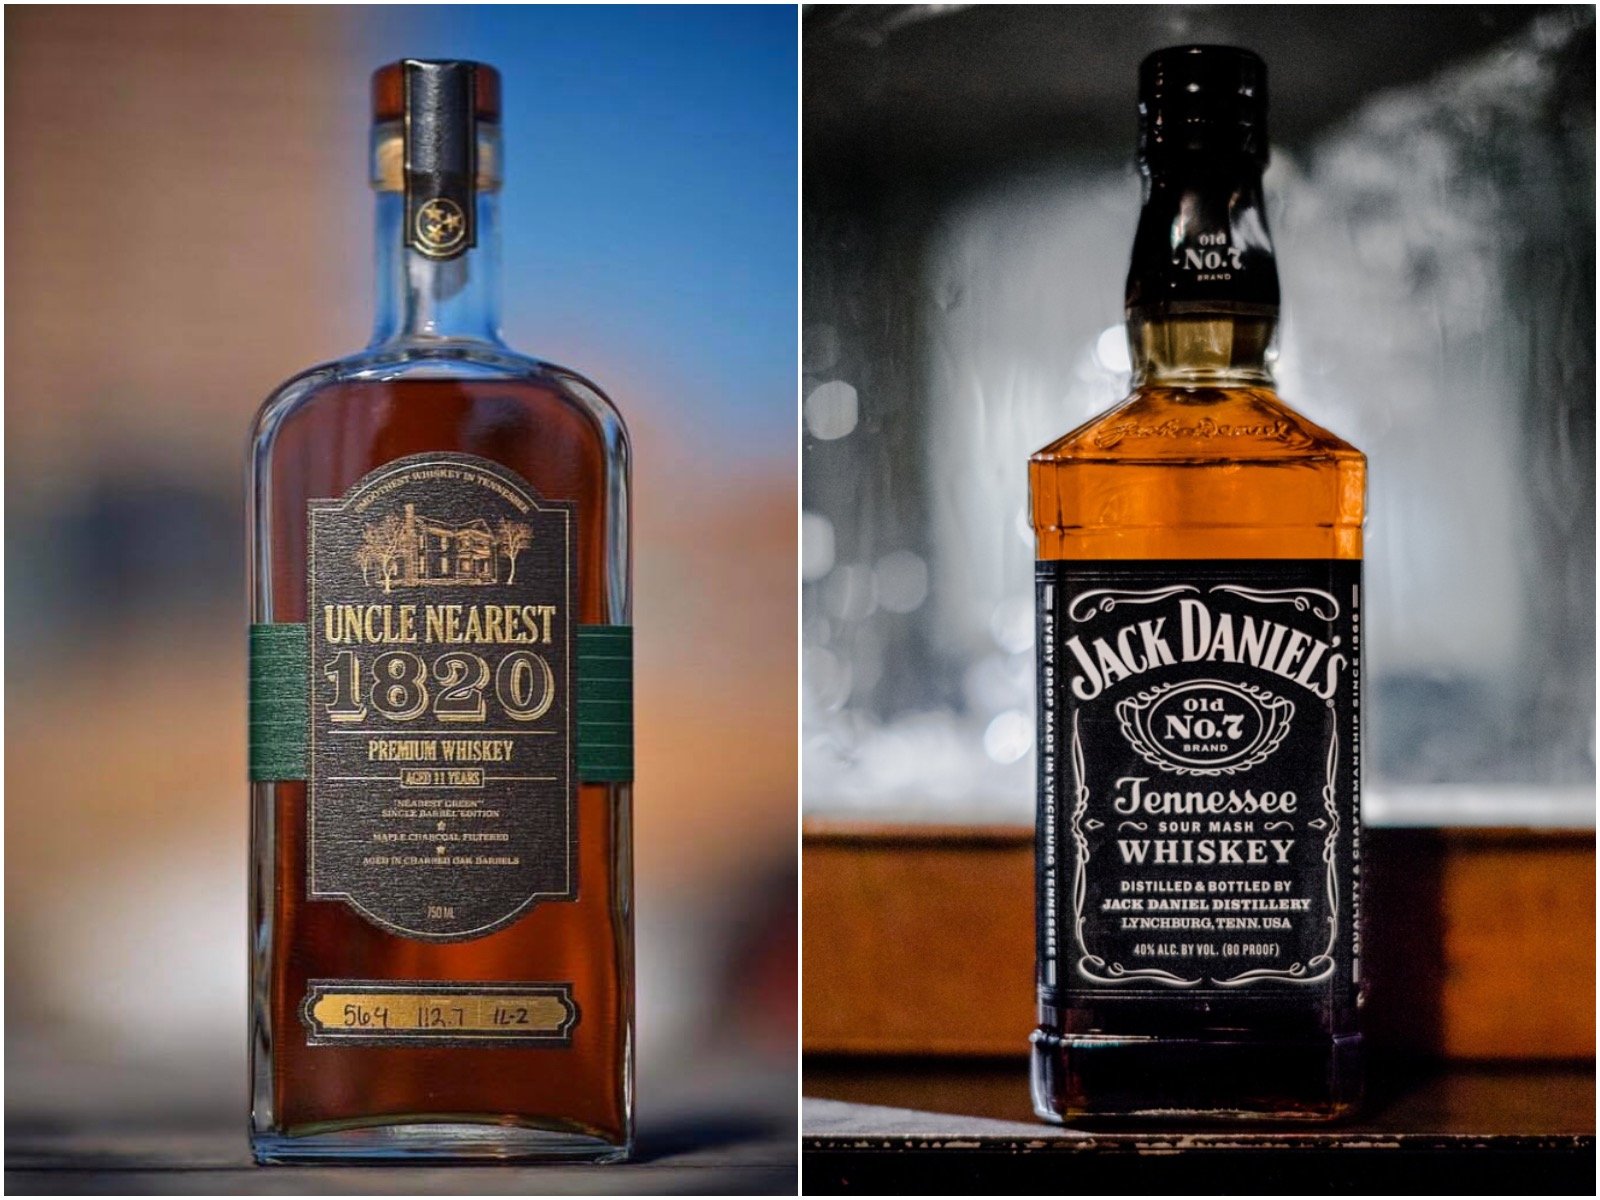 Jack Daniel's: The Story Behind America's #1 Selling Whiskey Brand